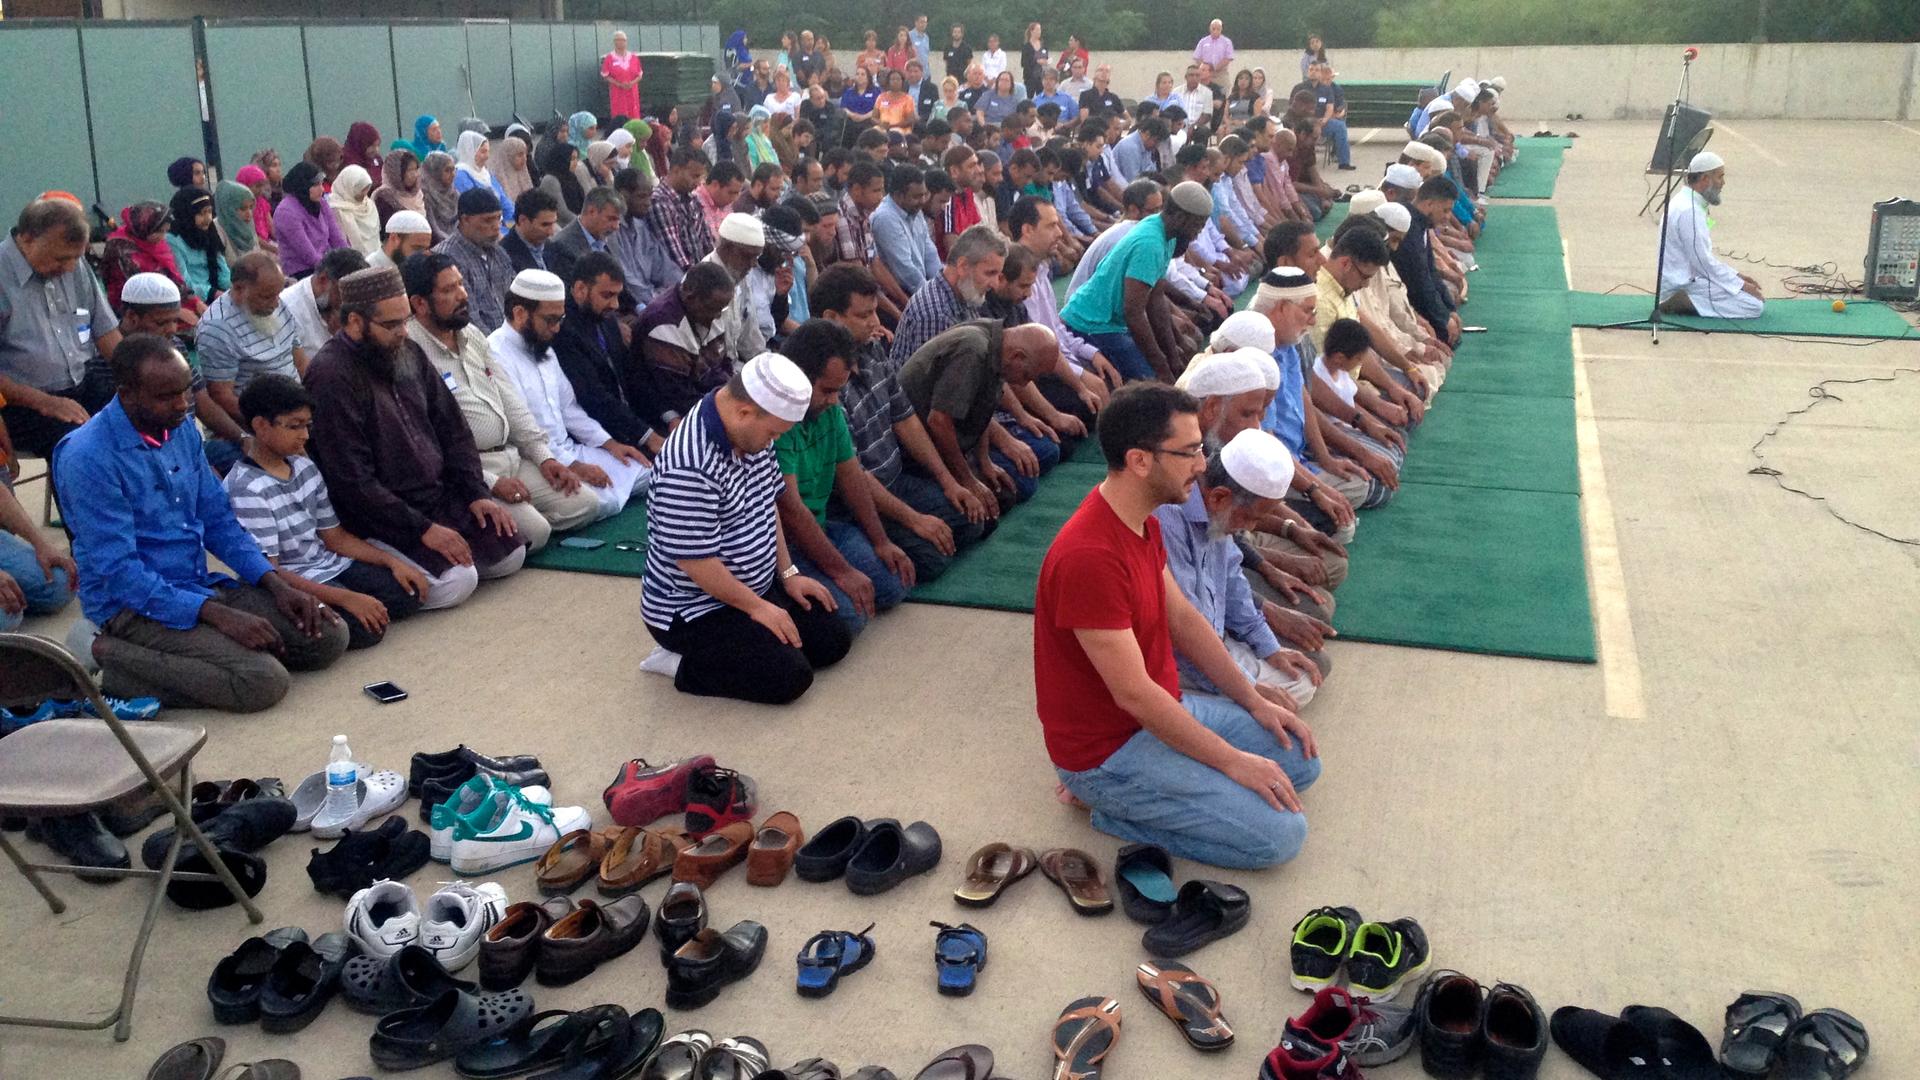 Evening prayers were held outside the mosque, while members of the public looked on.